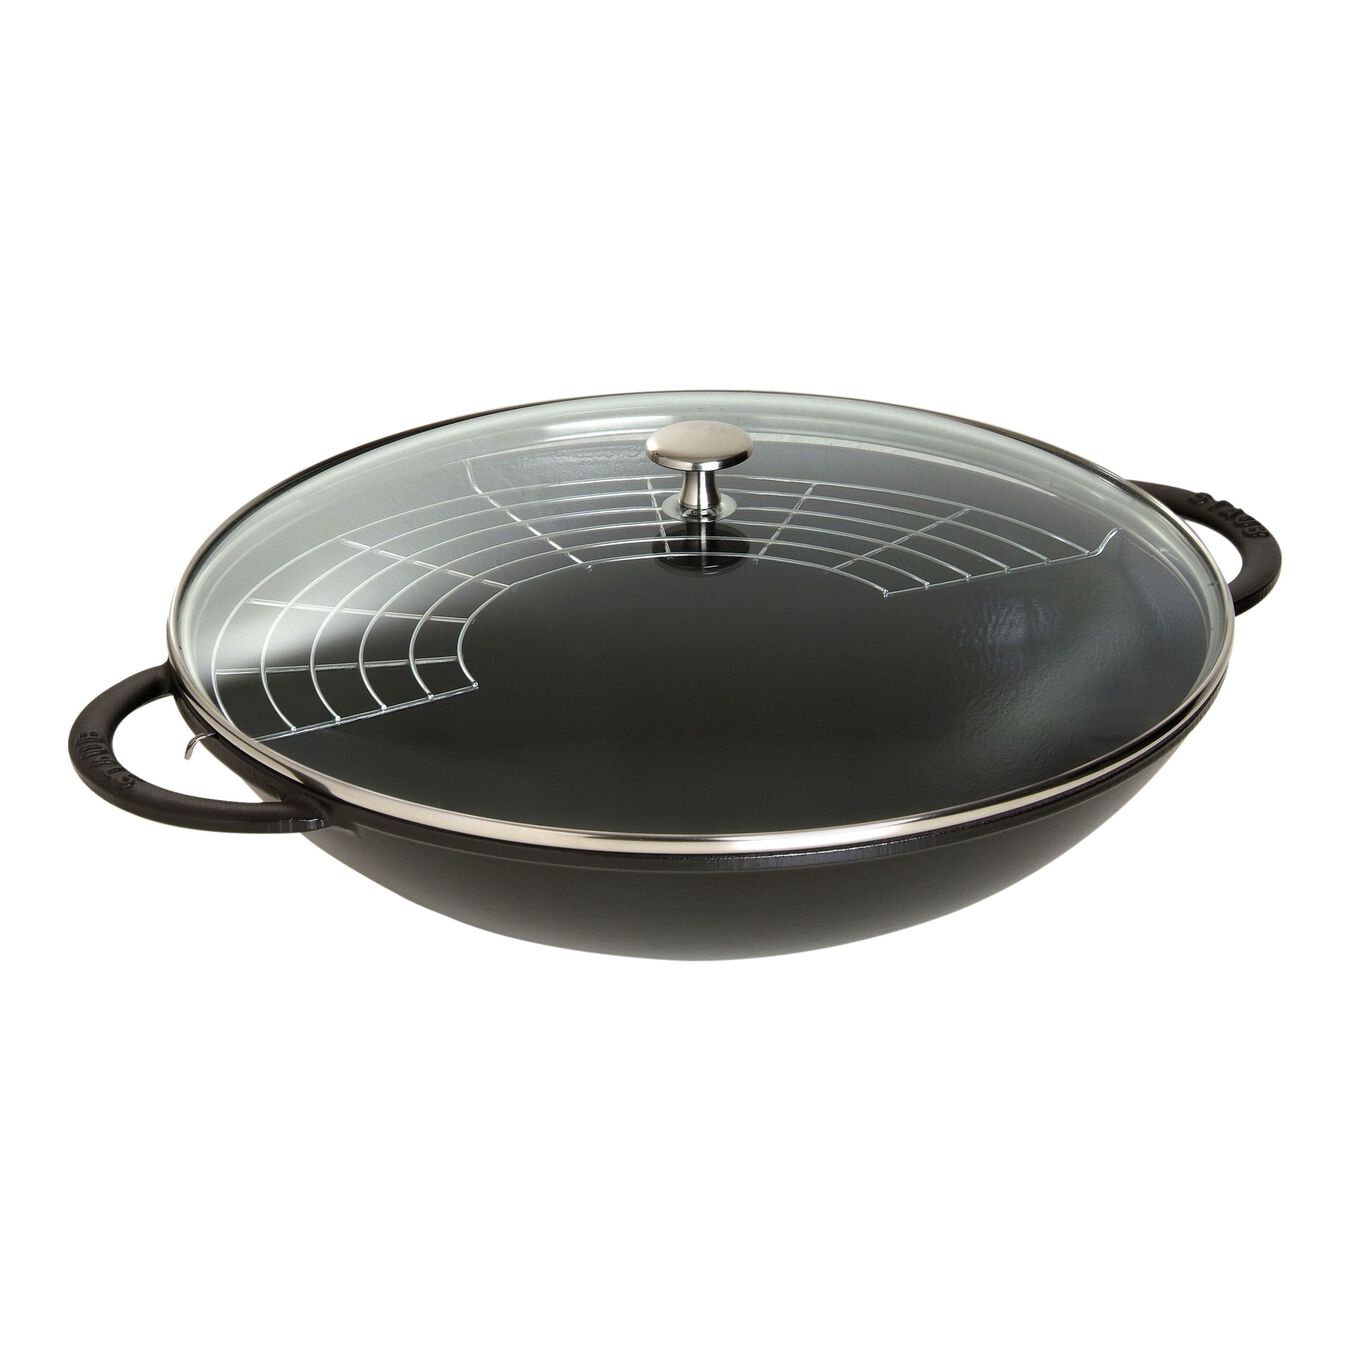 37 cm / 14.5 inch cast iron Wok with glass lid, black - Visual Imperfections,,large 1